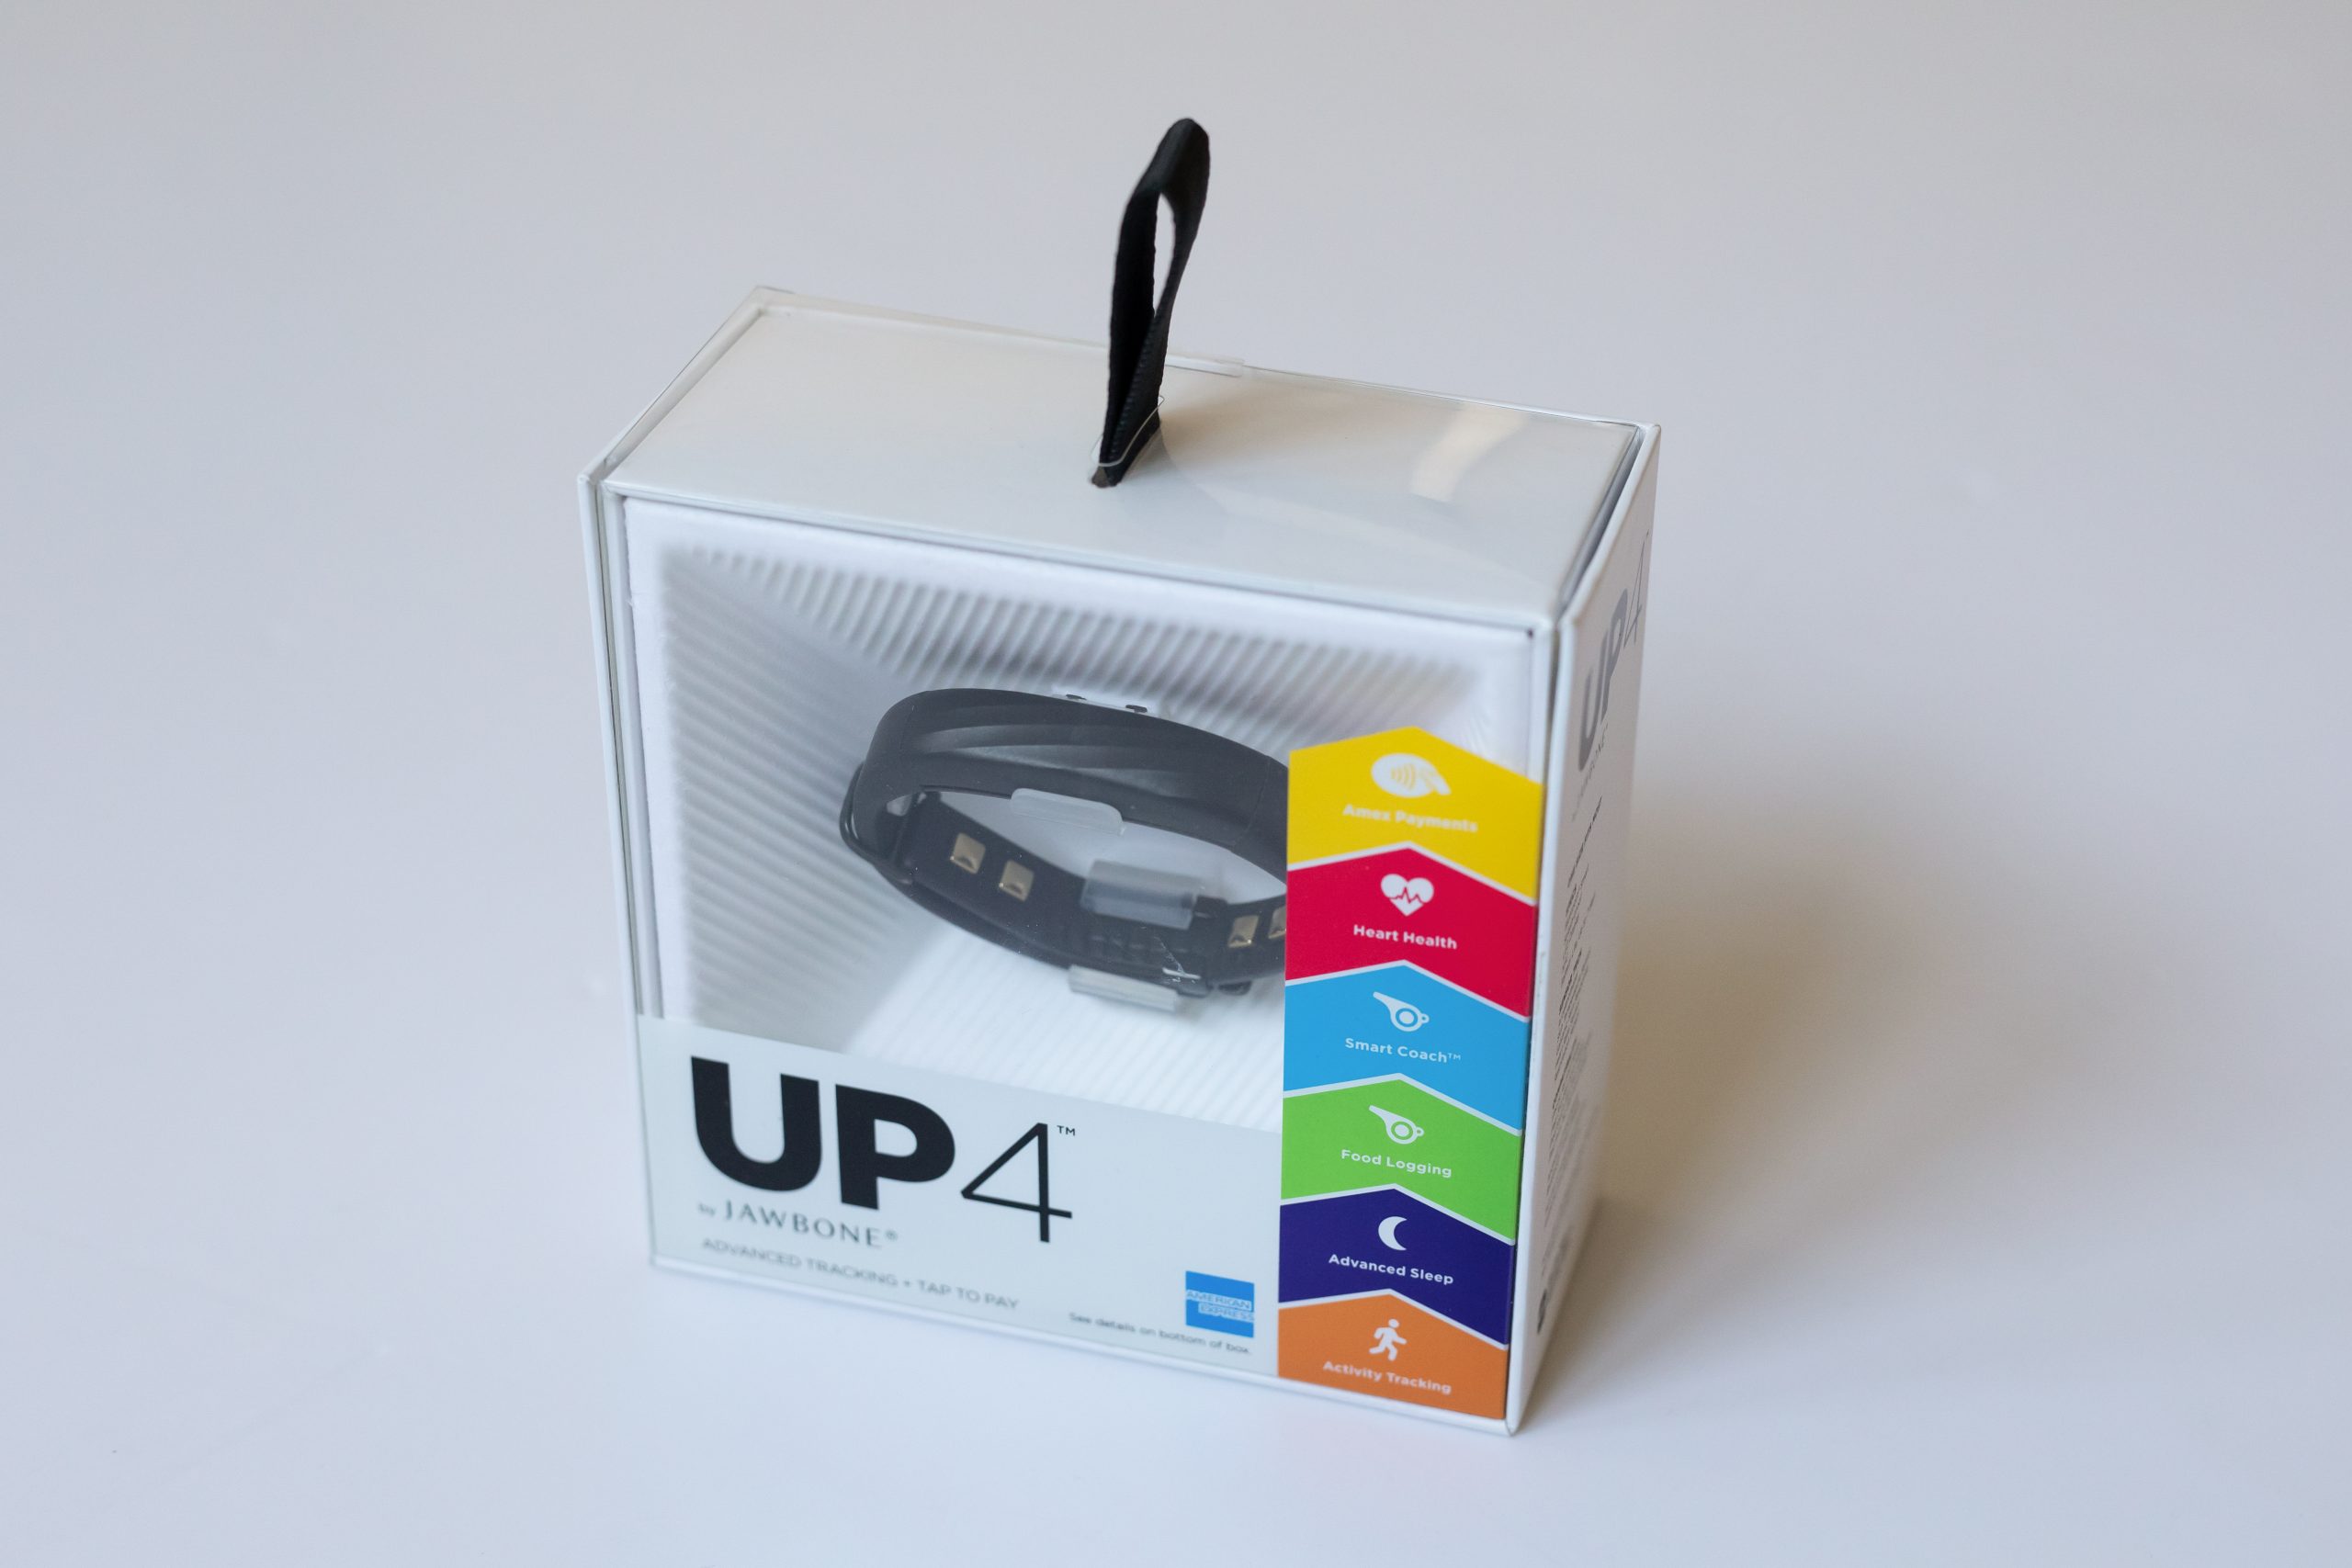 UP4 Fitness Band by Jawbone